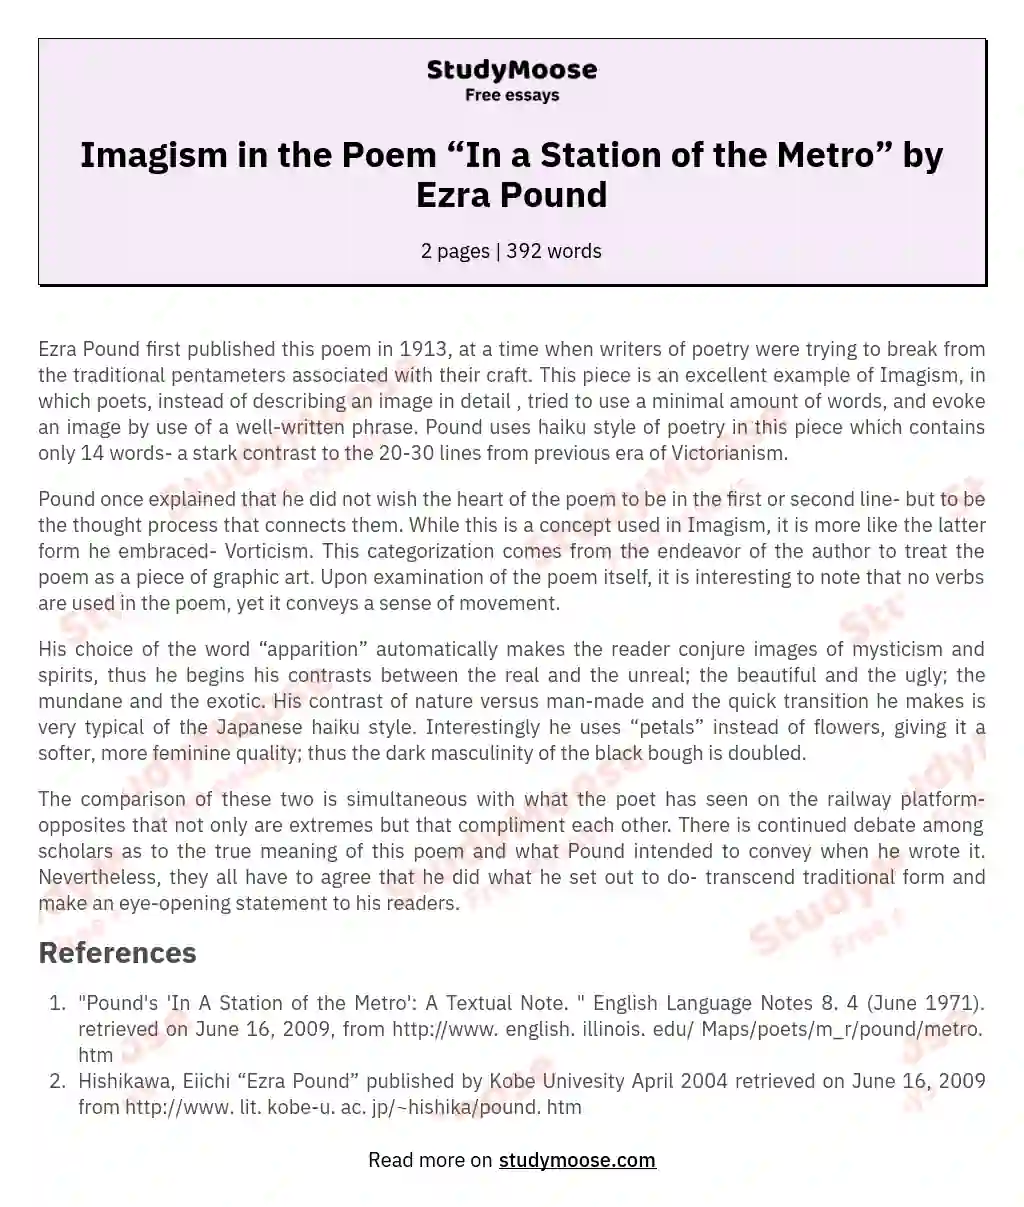 Imagism in the Poem “In a Station of the Metro” by Ezra Pound essay